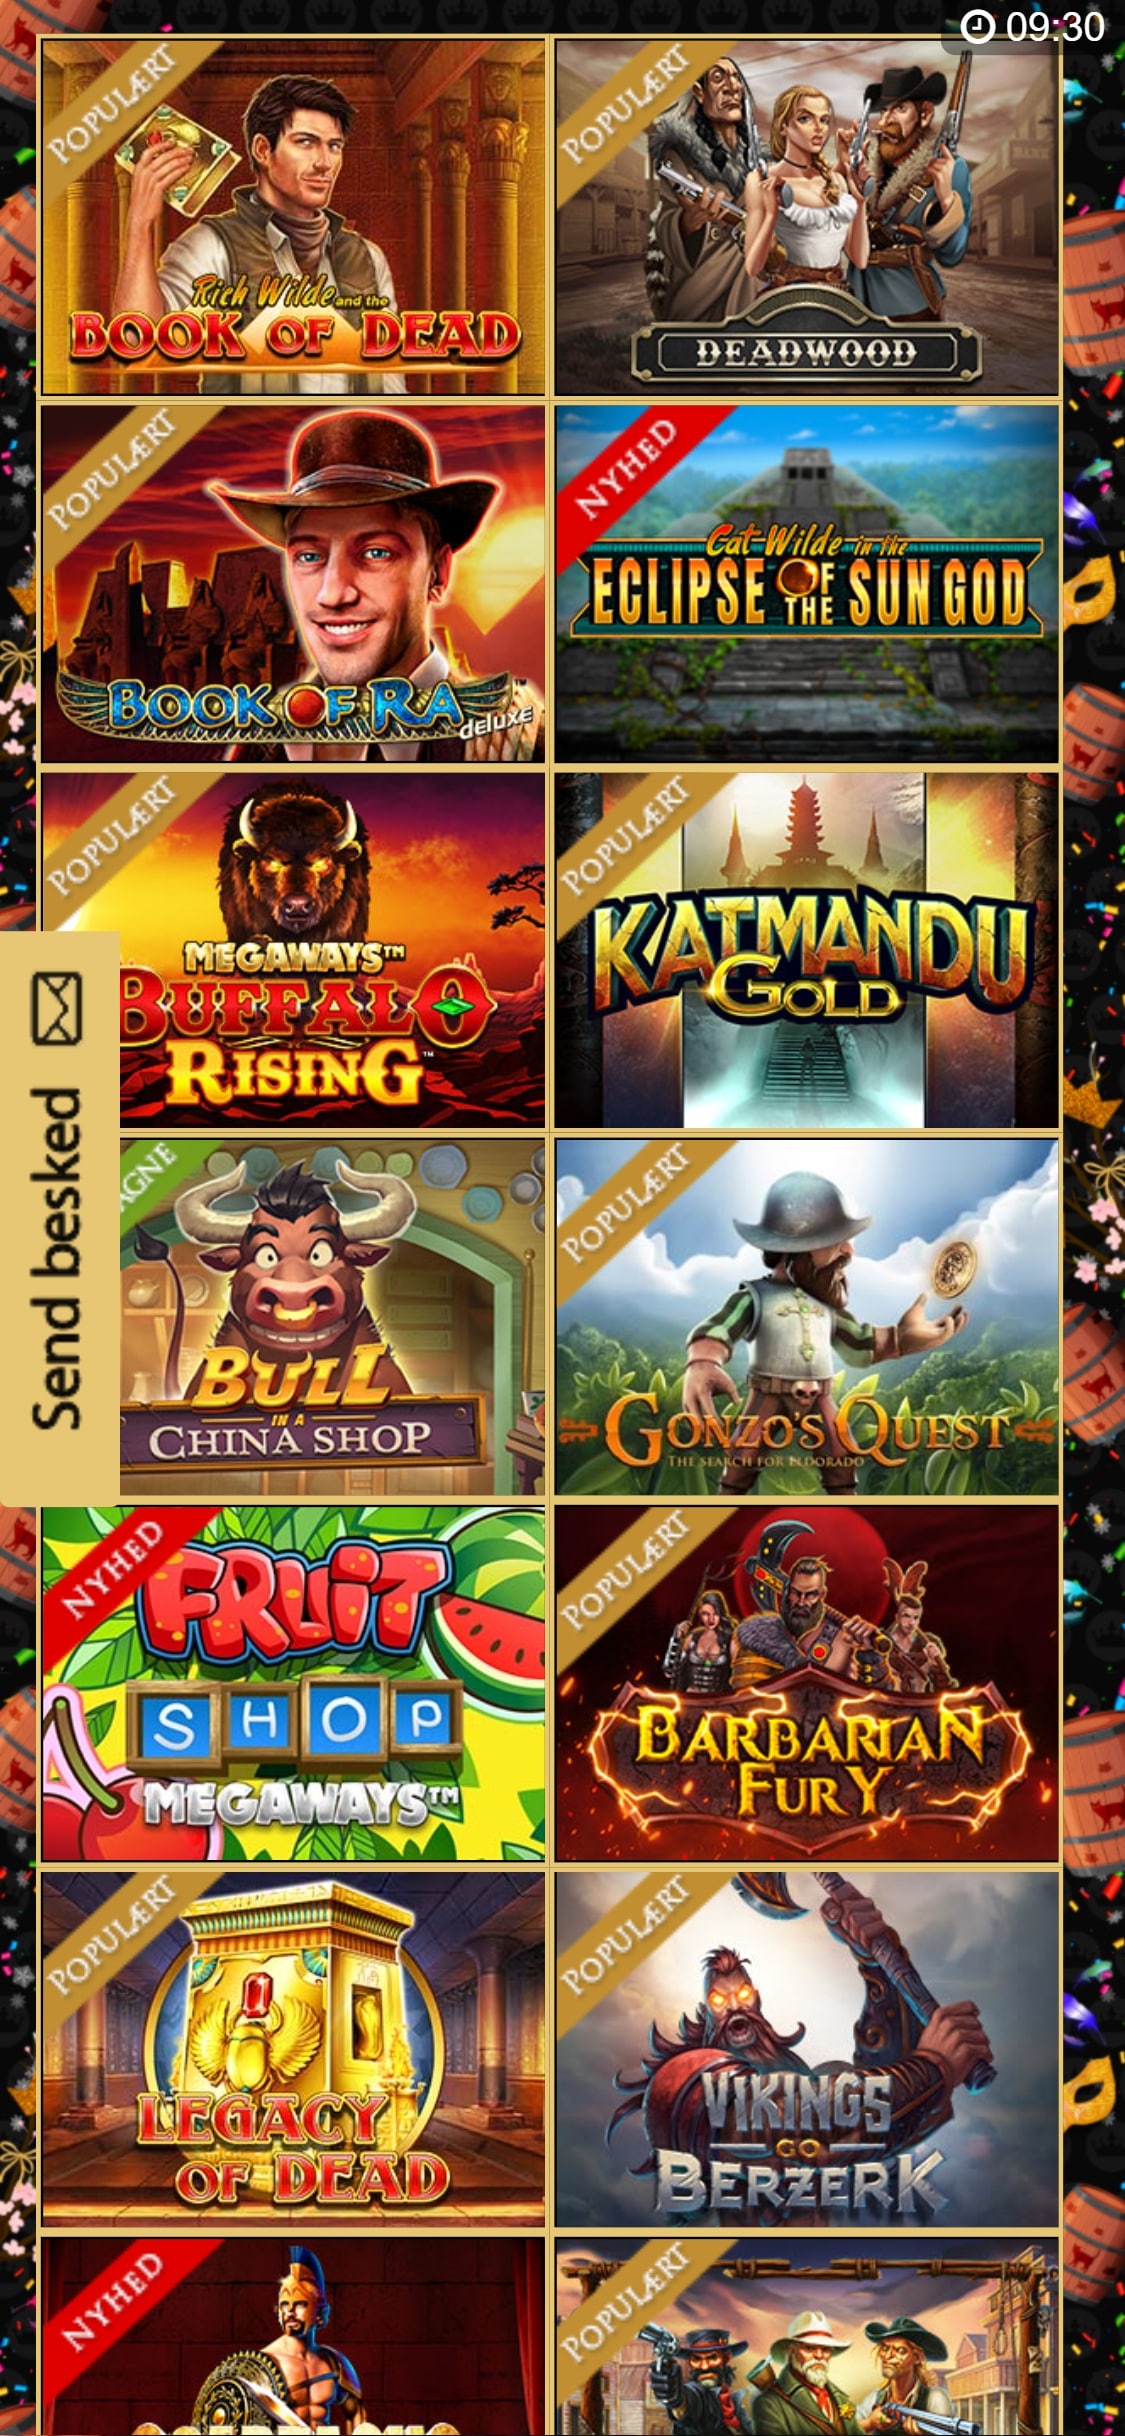 RoyalCasino Mobile Games Review